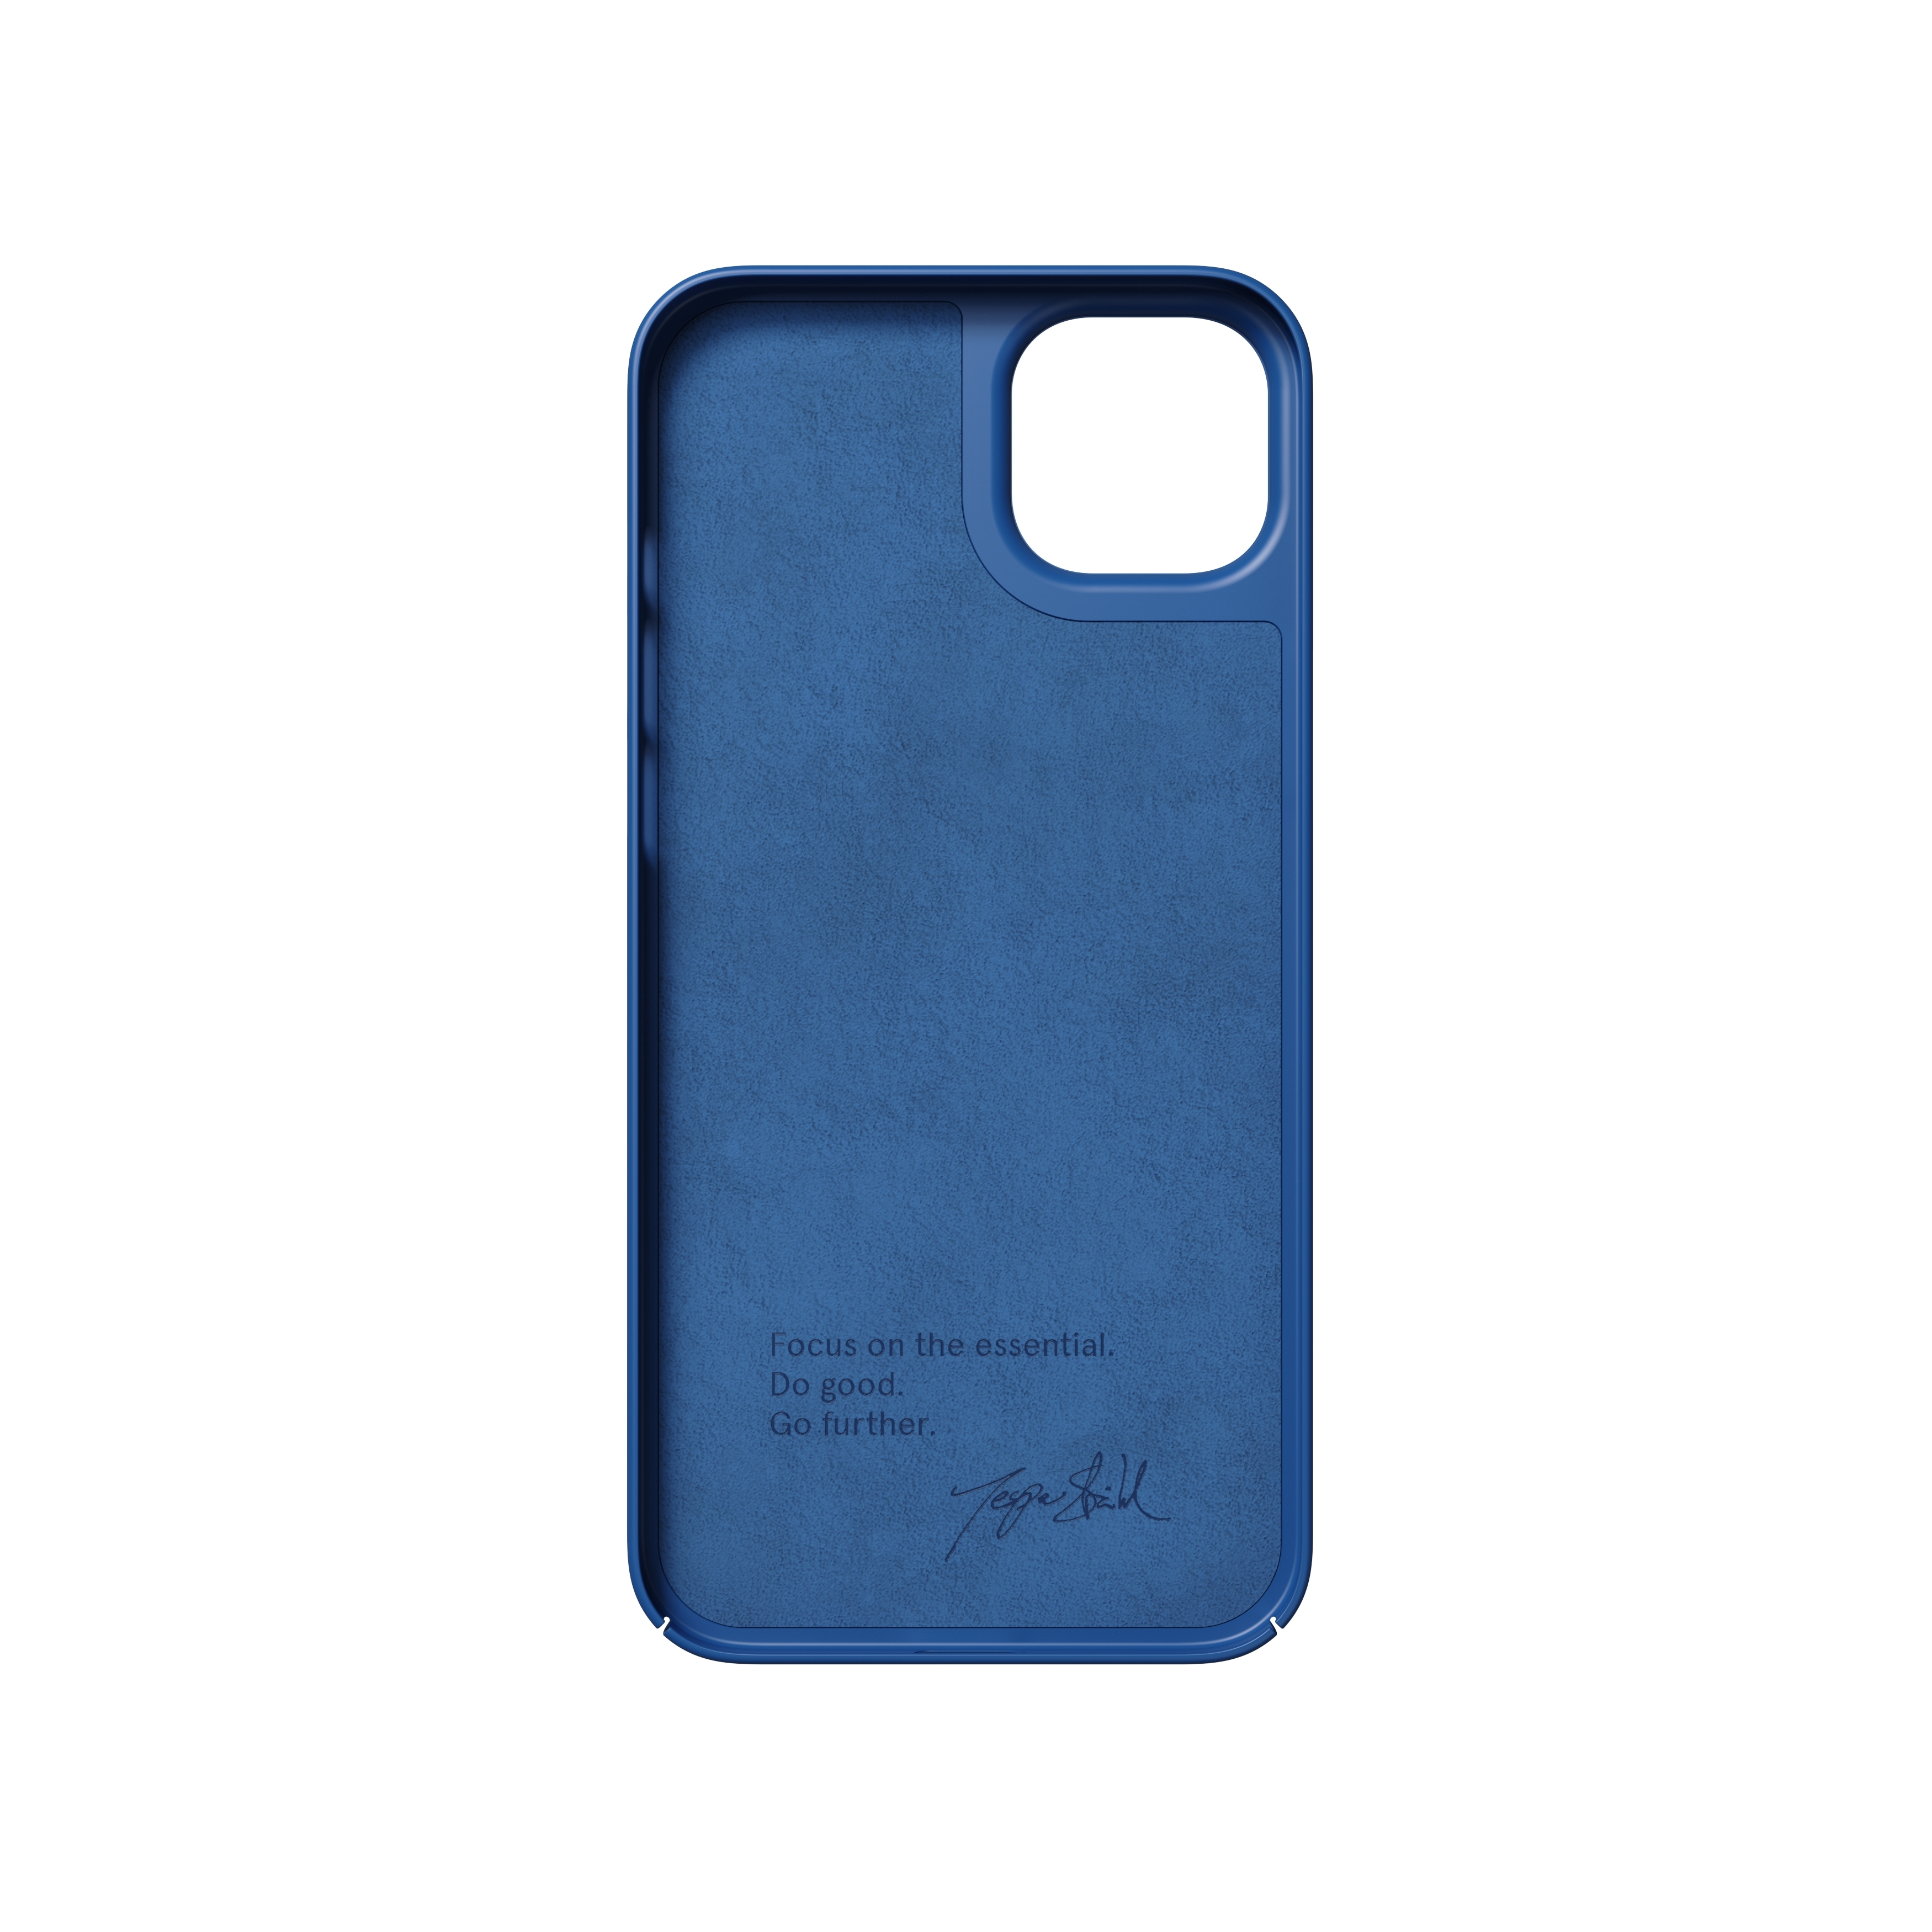 PLUS, NUDIENT 14 Backcover, BLUE Thin, IPHONE APPLE,